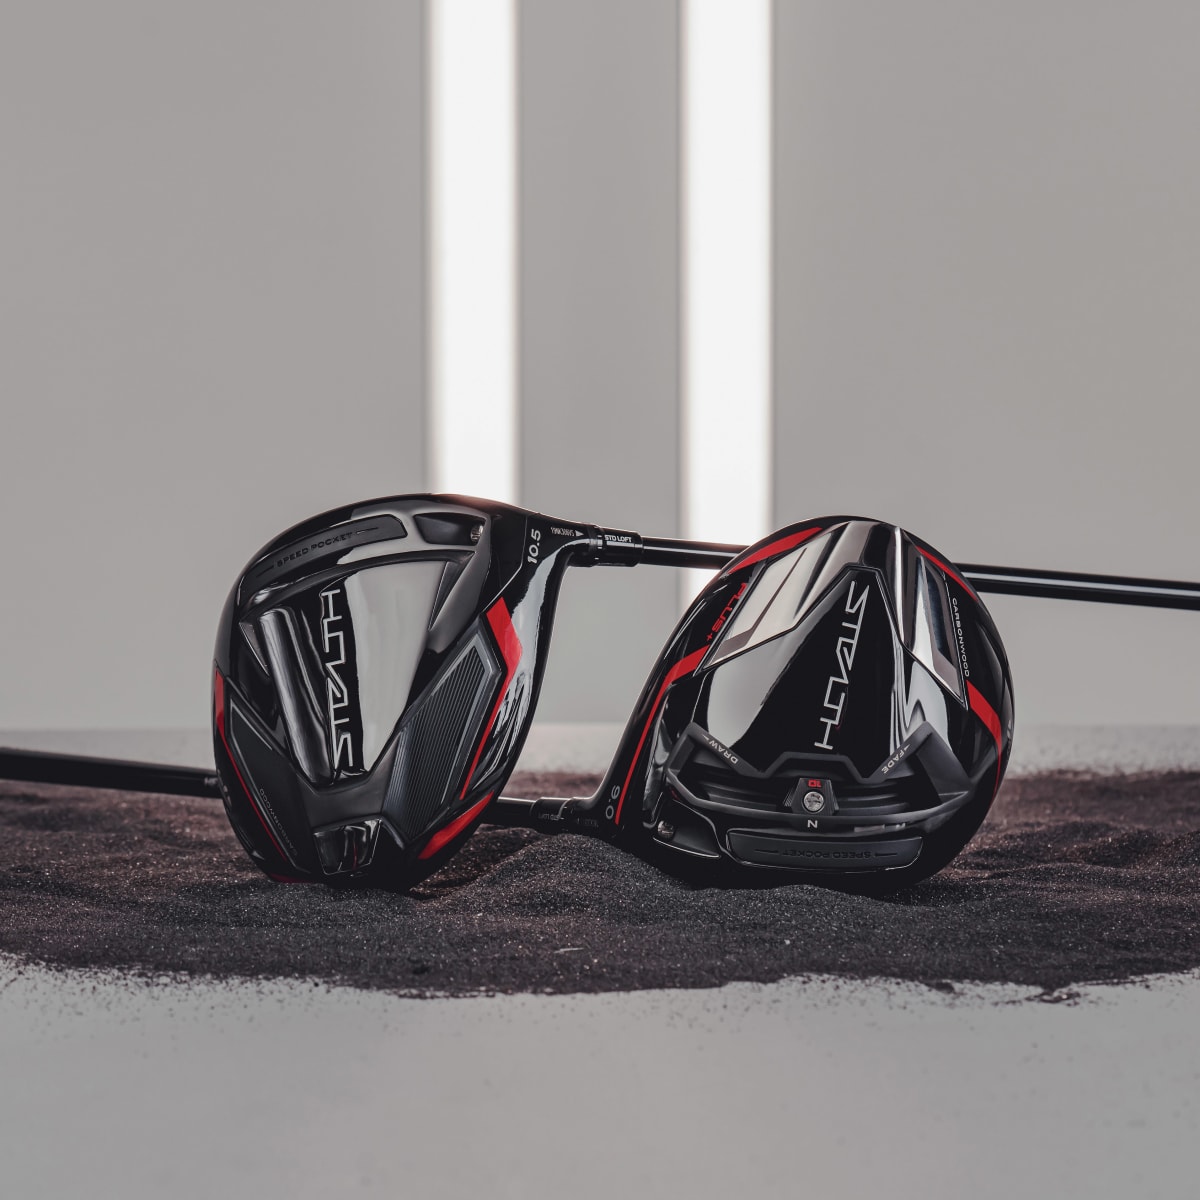 Taylormade’s Carbon Fiber Stealth Drivers Deliver Speed Sports Illustrated Golf: News, Scores, Equipment, Instruction, Travel, Courses